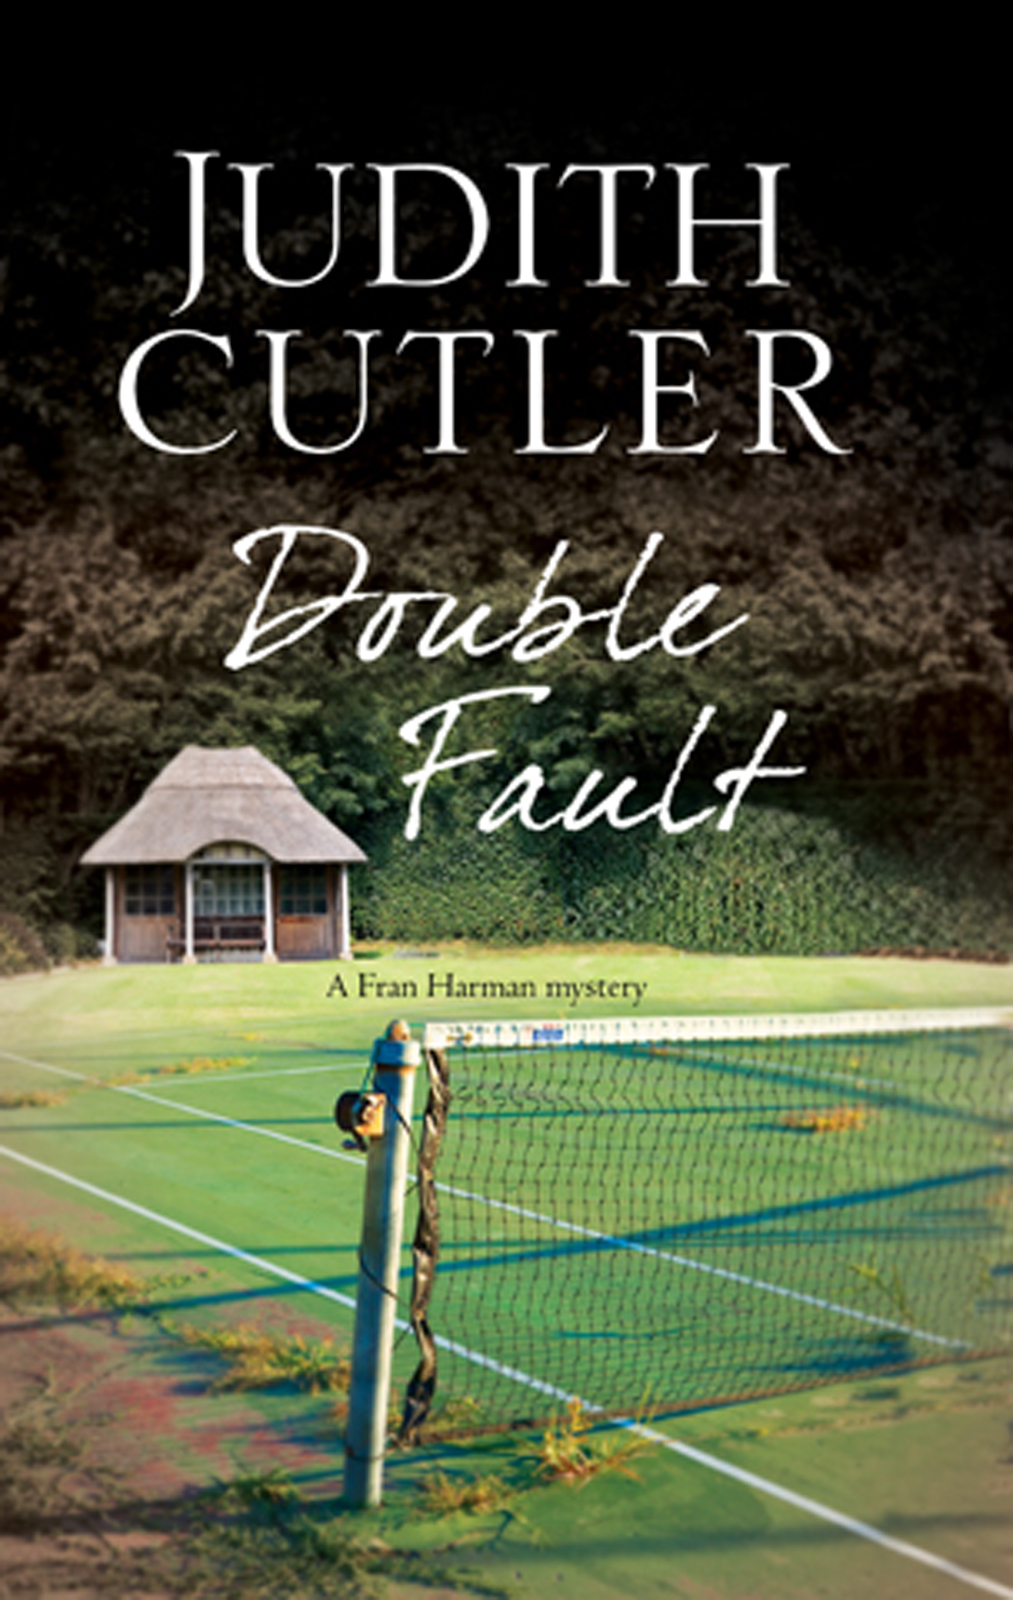 Double Fault (2013) by Judith Cutler